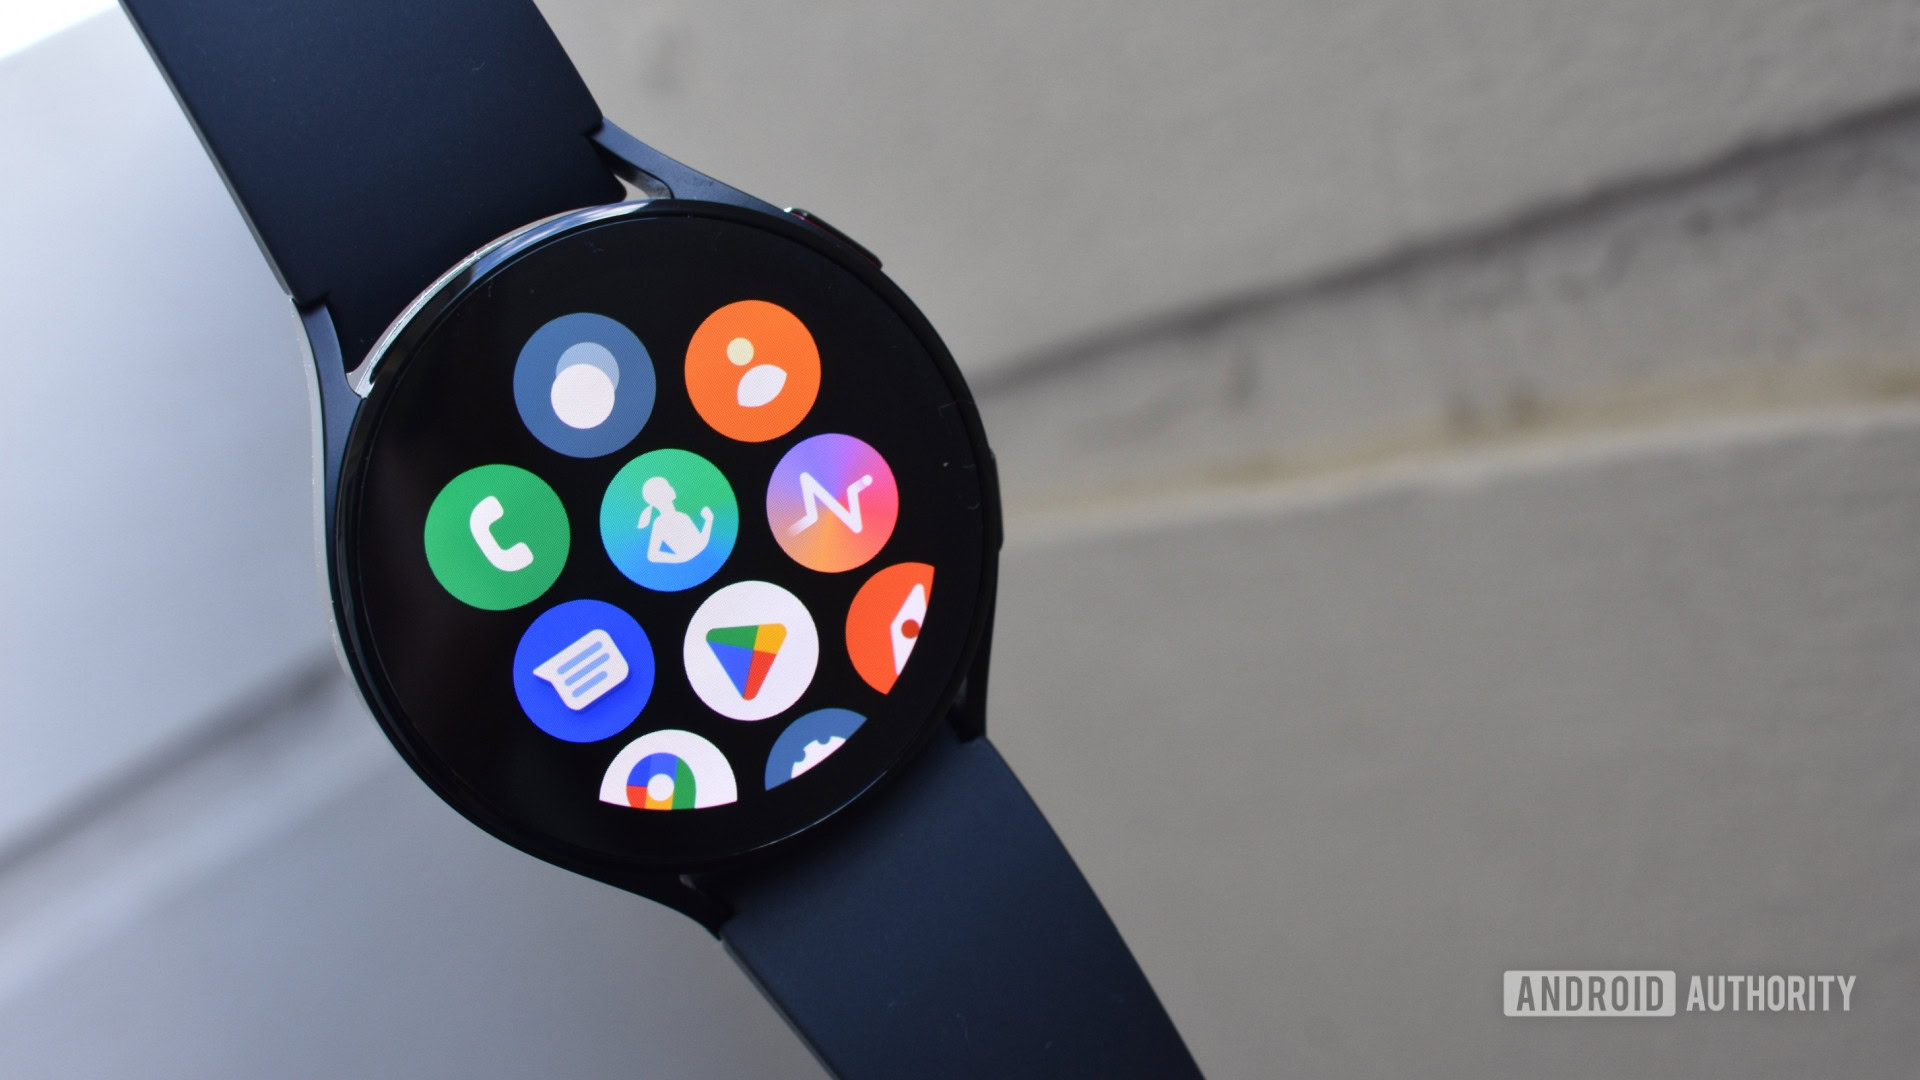 Samsung Galaxy Watch 5 Review: The best gets better